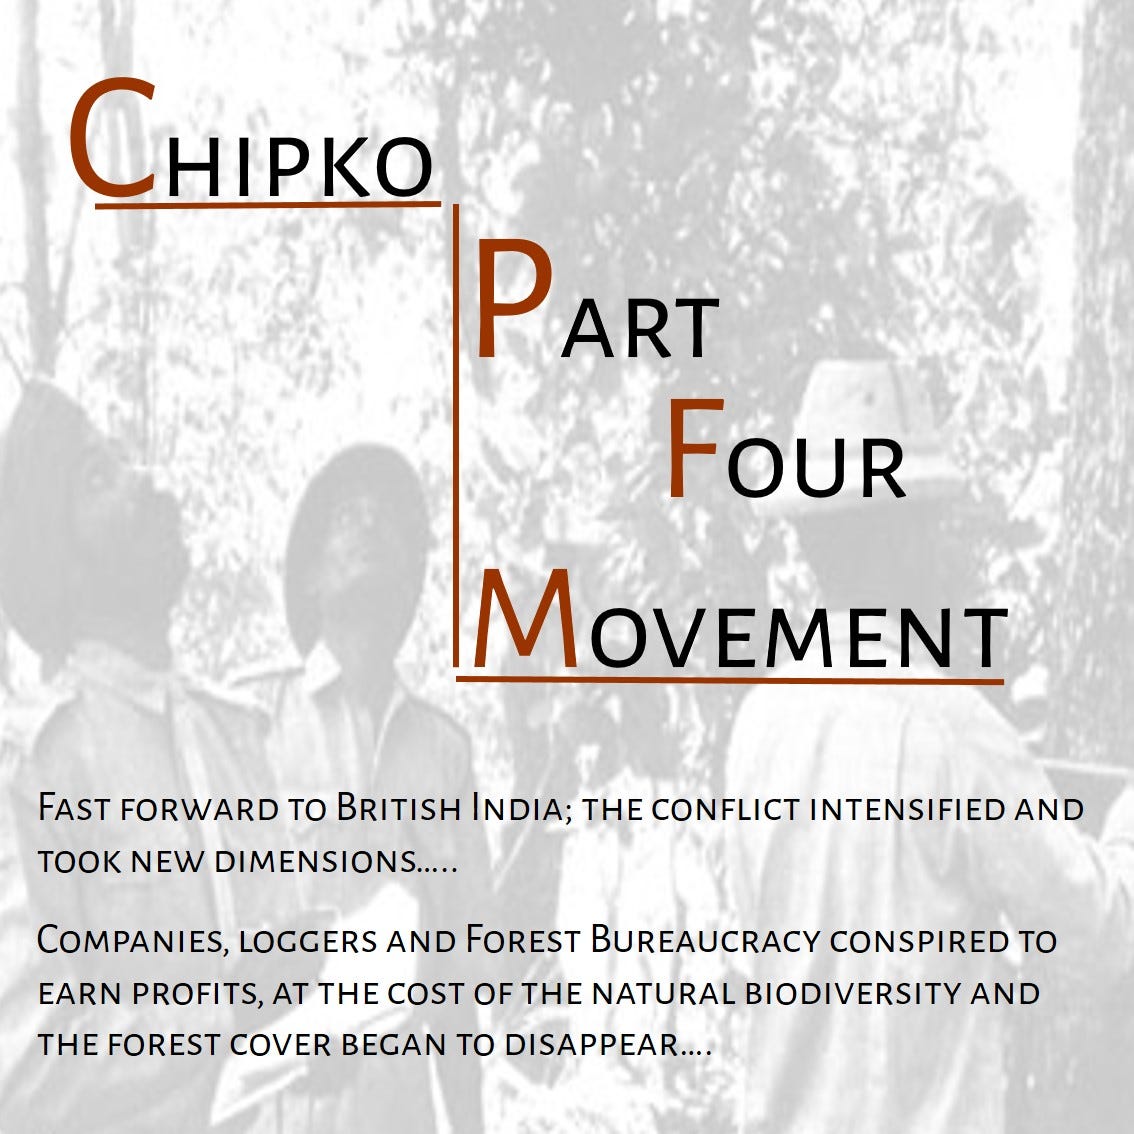 What do forests bear? Soil, water and pure air I Remembering the Chipko Andolan II Part Four